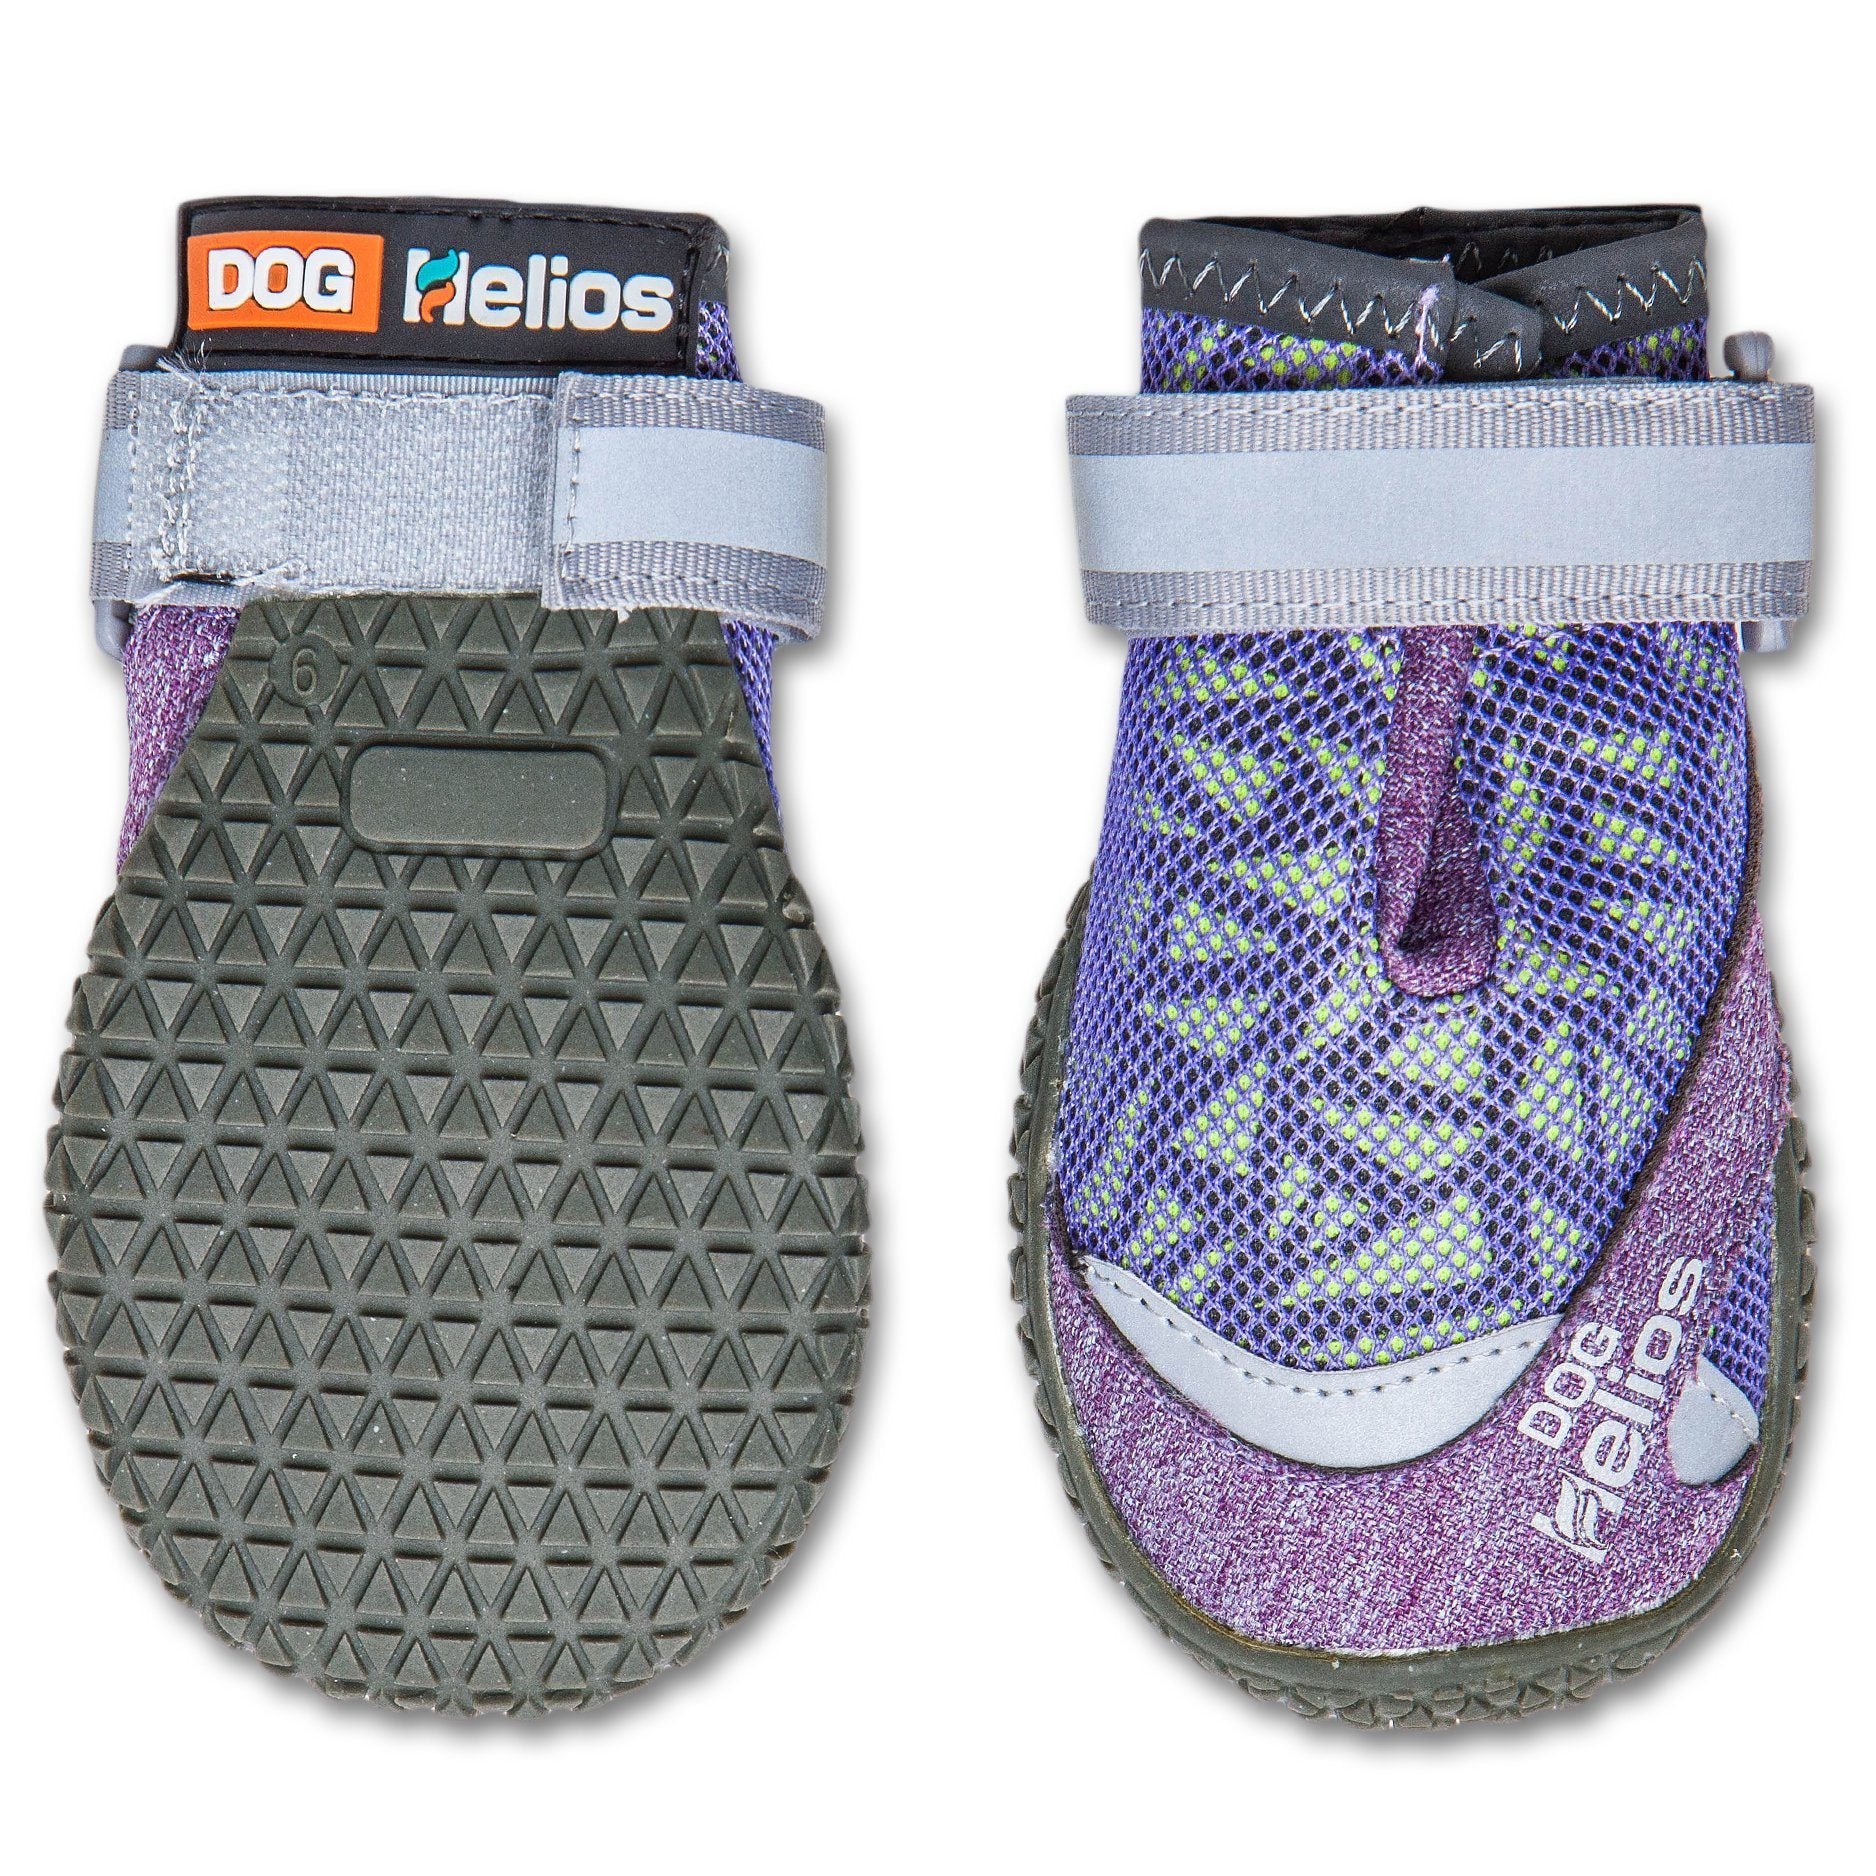 Dog Helios 'Surface' Premium Grip Performance Dog Shoes - Set Of 4 X-Small Purple